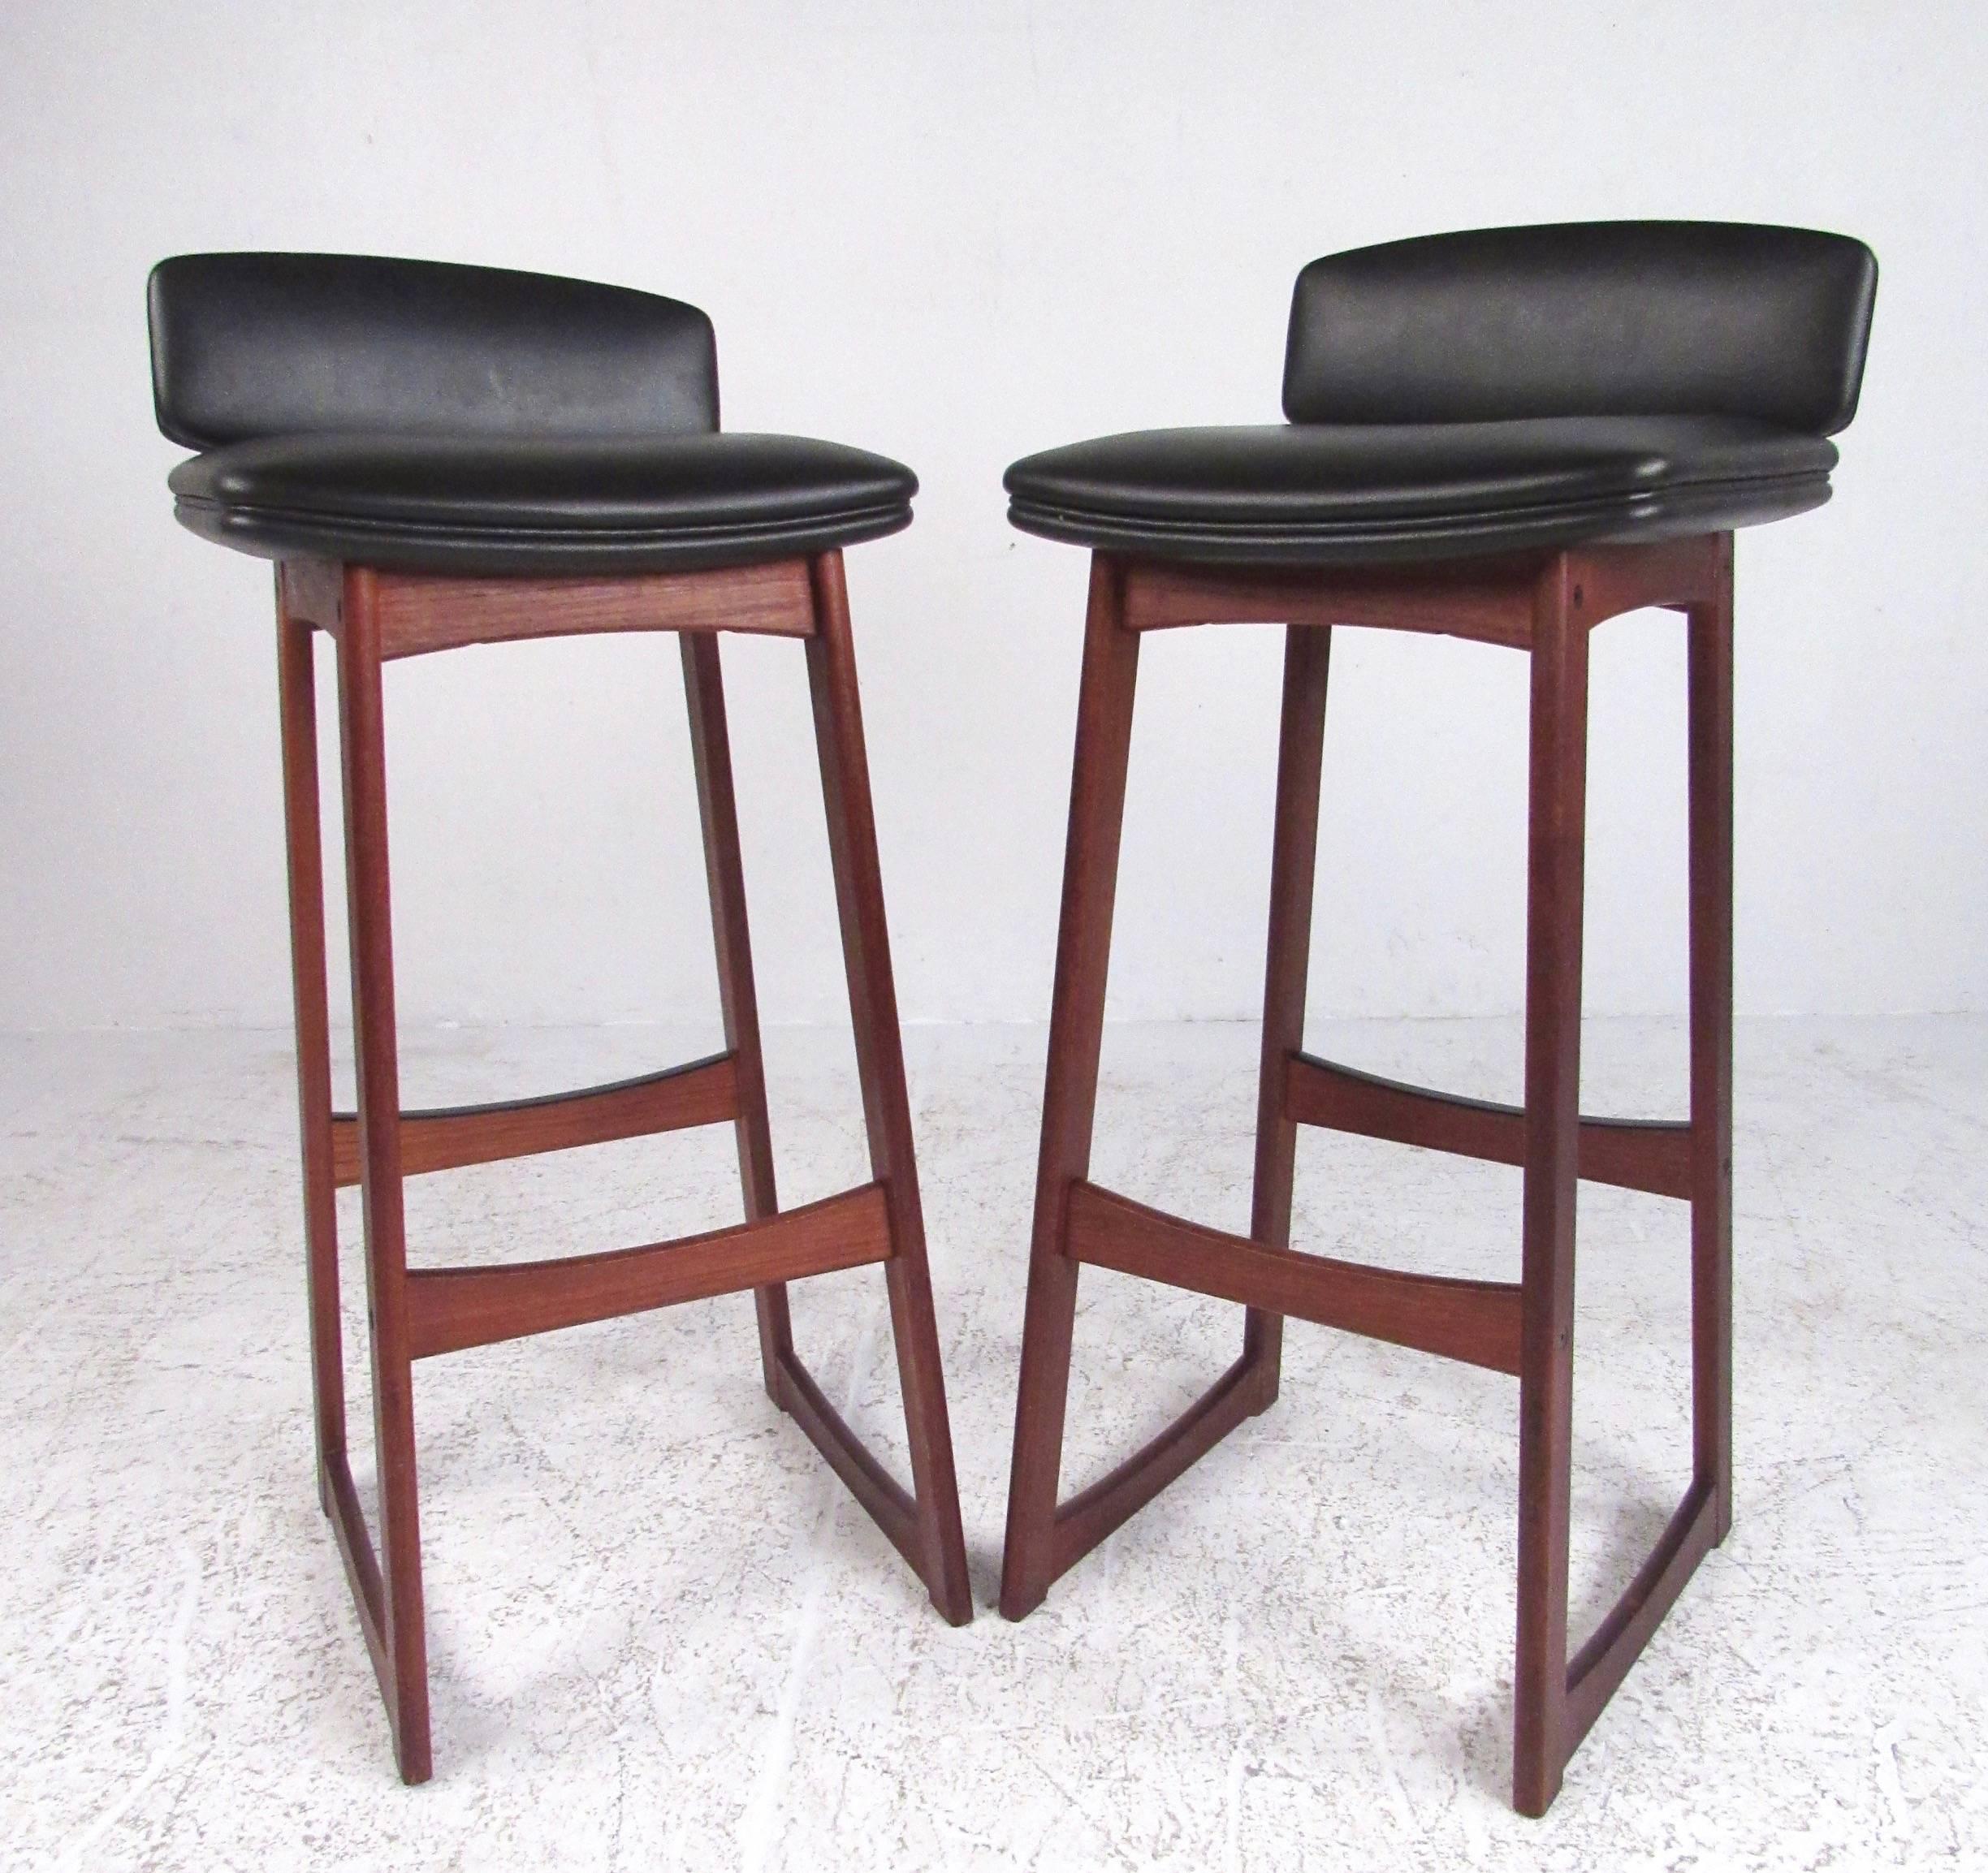  Scandinavian Modern Dry Bar with Low Back Stools in Teak In Good Condition For Sale In Brooklyn, NY